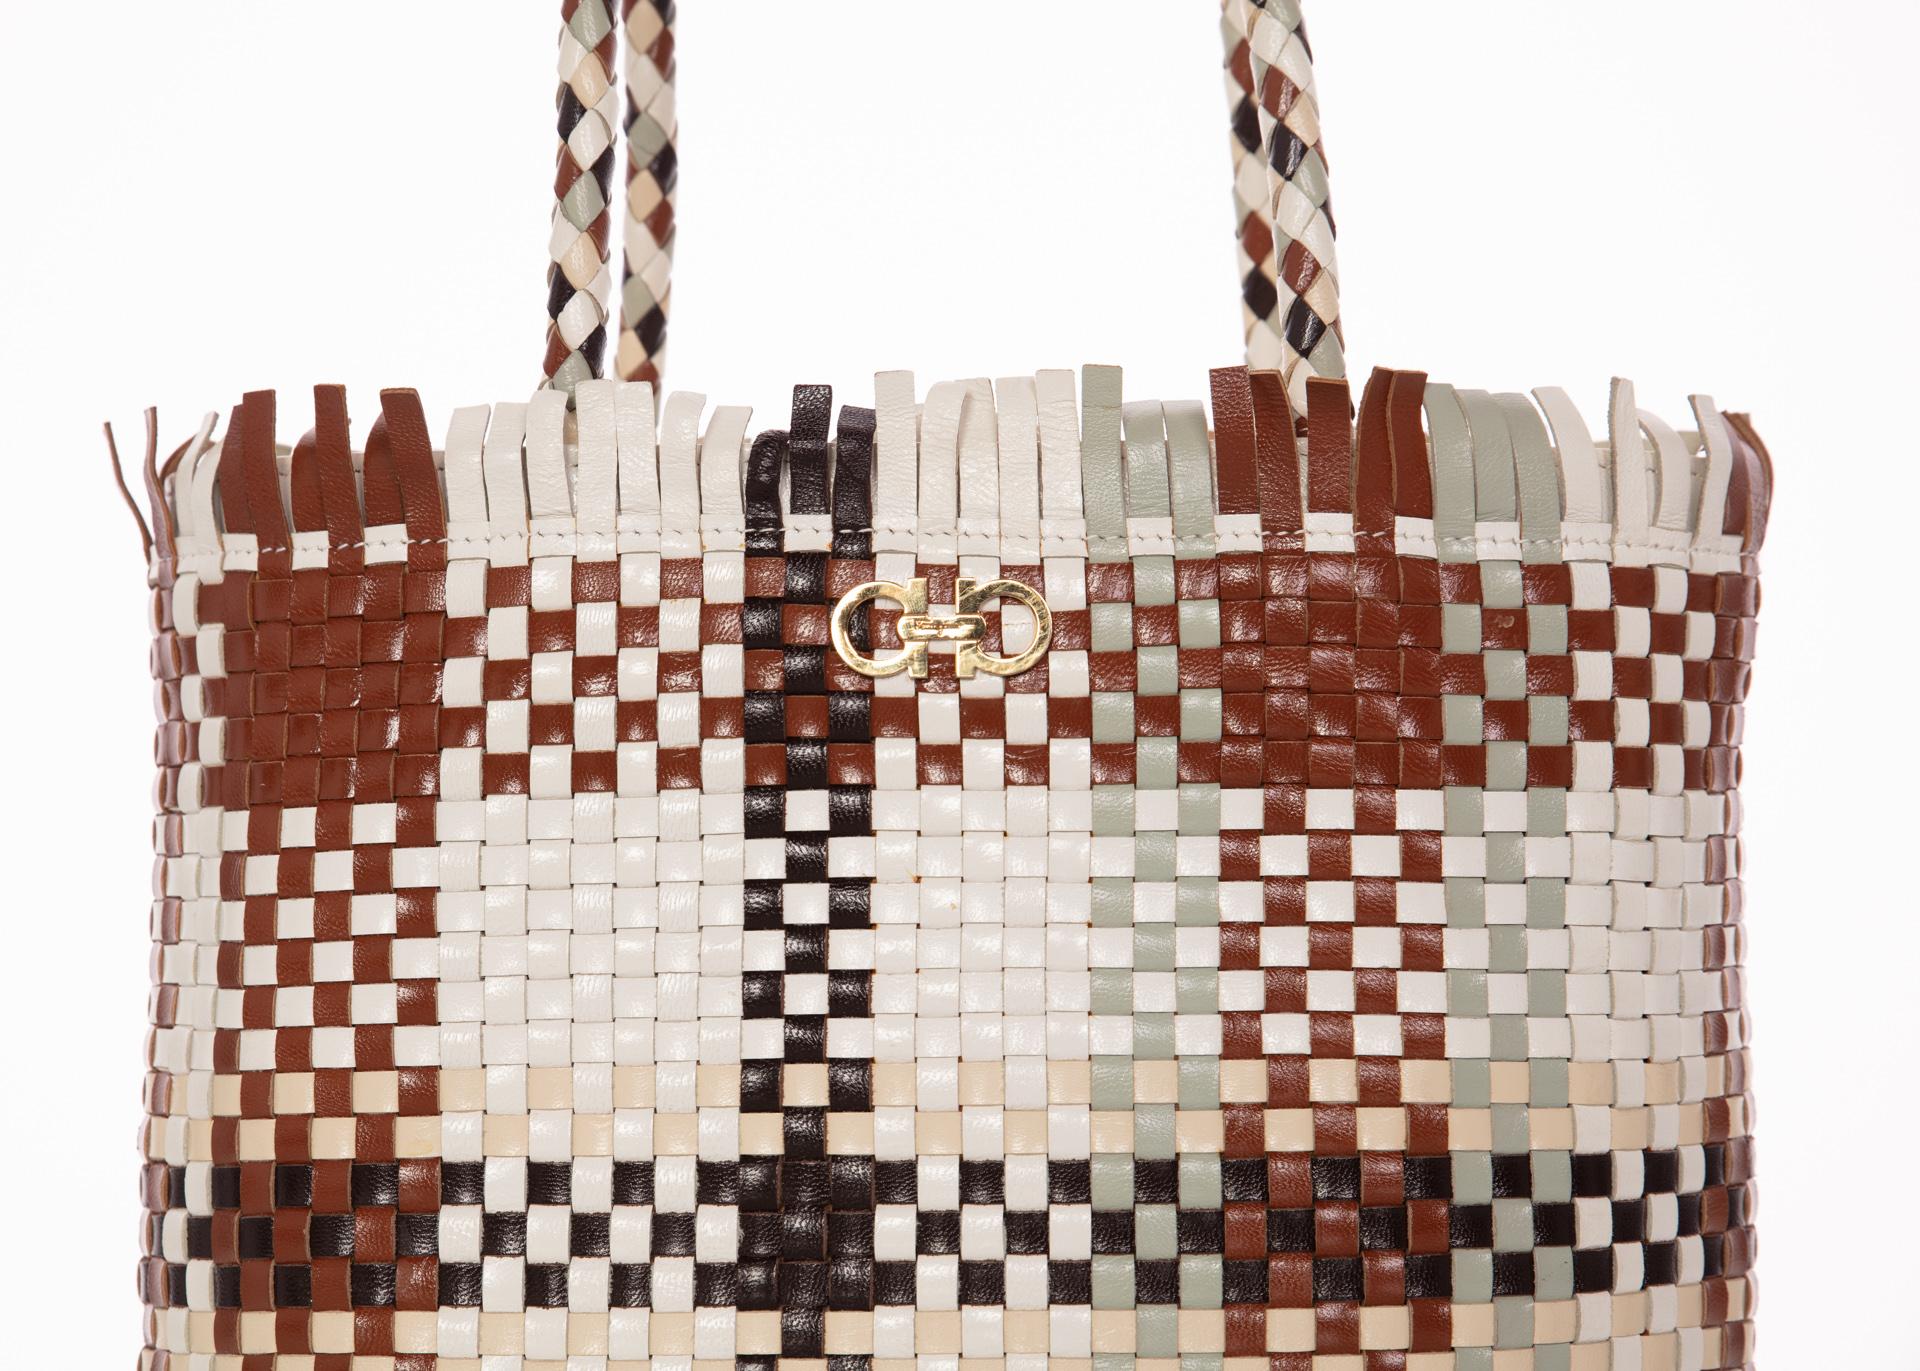 Salvatore Ferragamo Multicolor Woven Shoulder bag. 
Brown, ivory, creme, sage green and black  woven leather shoulder and shopper tote bag with gold-tone Gancini accent at front face, dual rolled handles, black jacquard interior lining, single